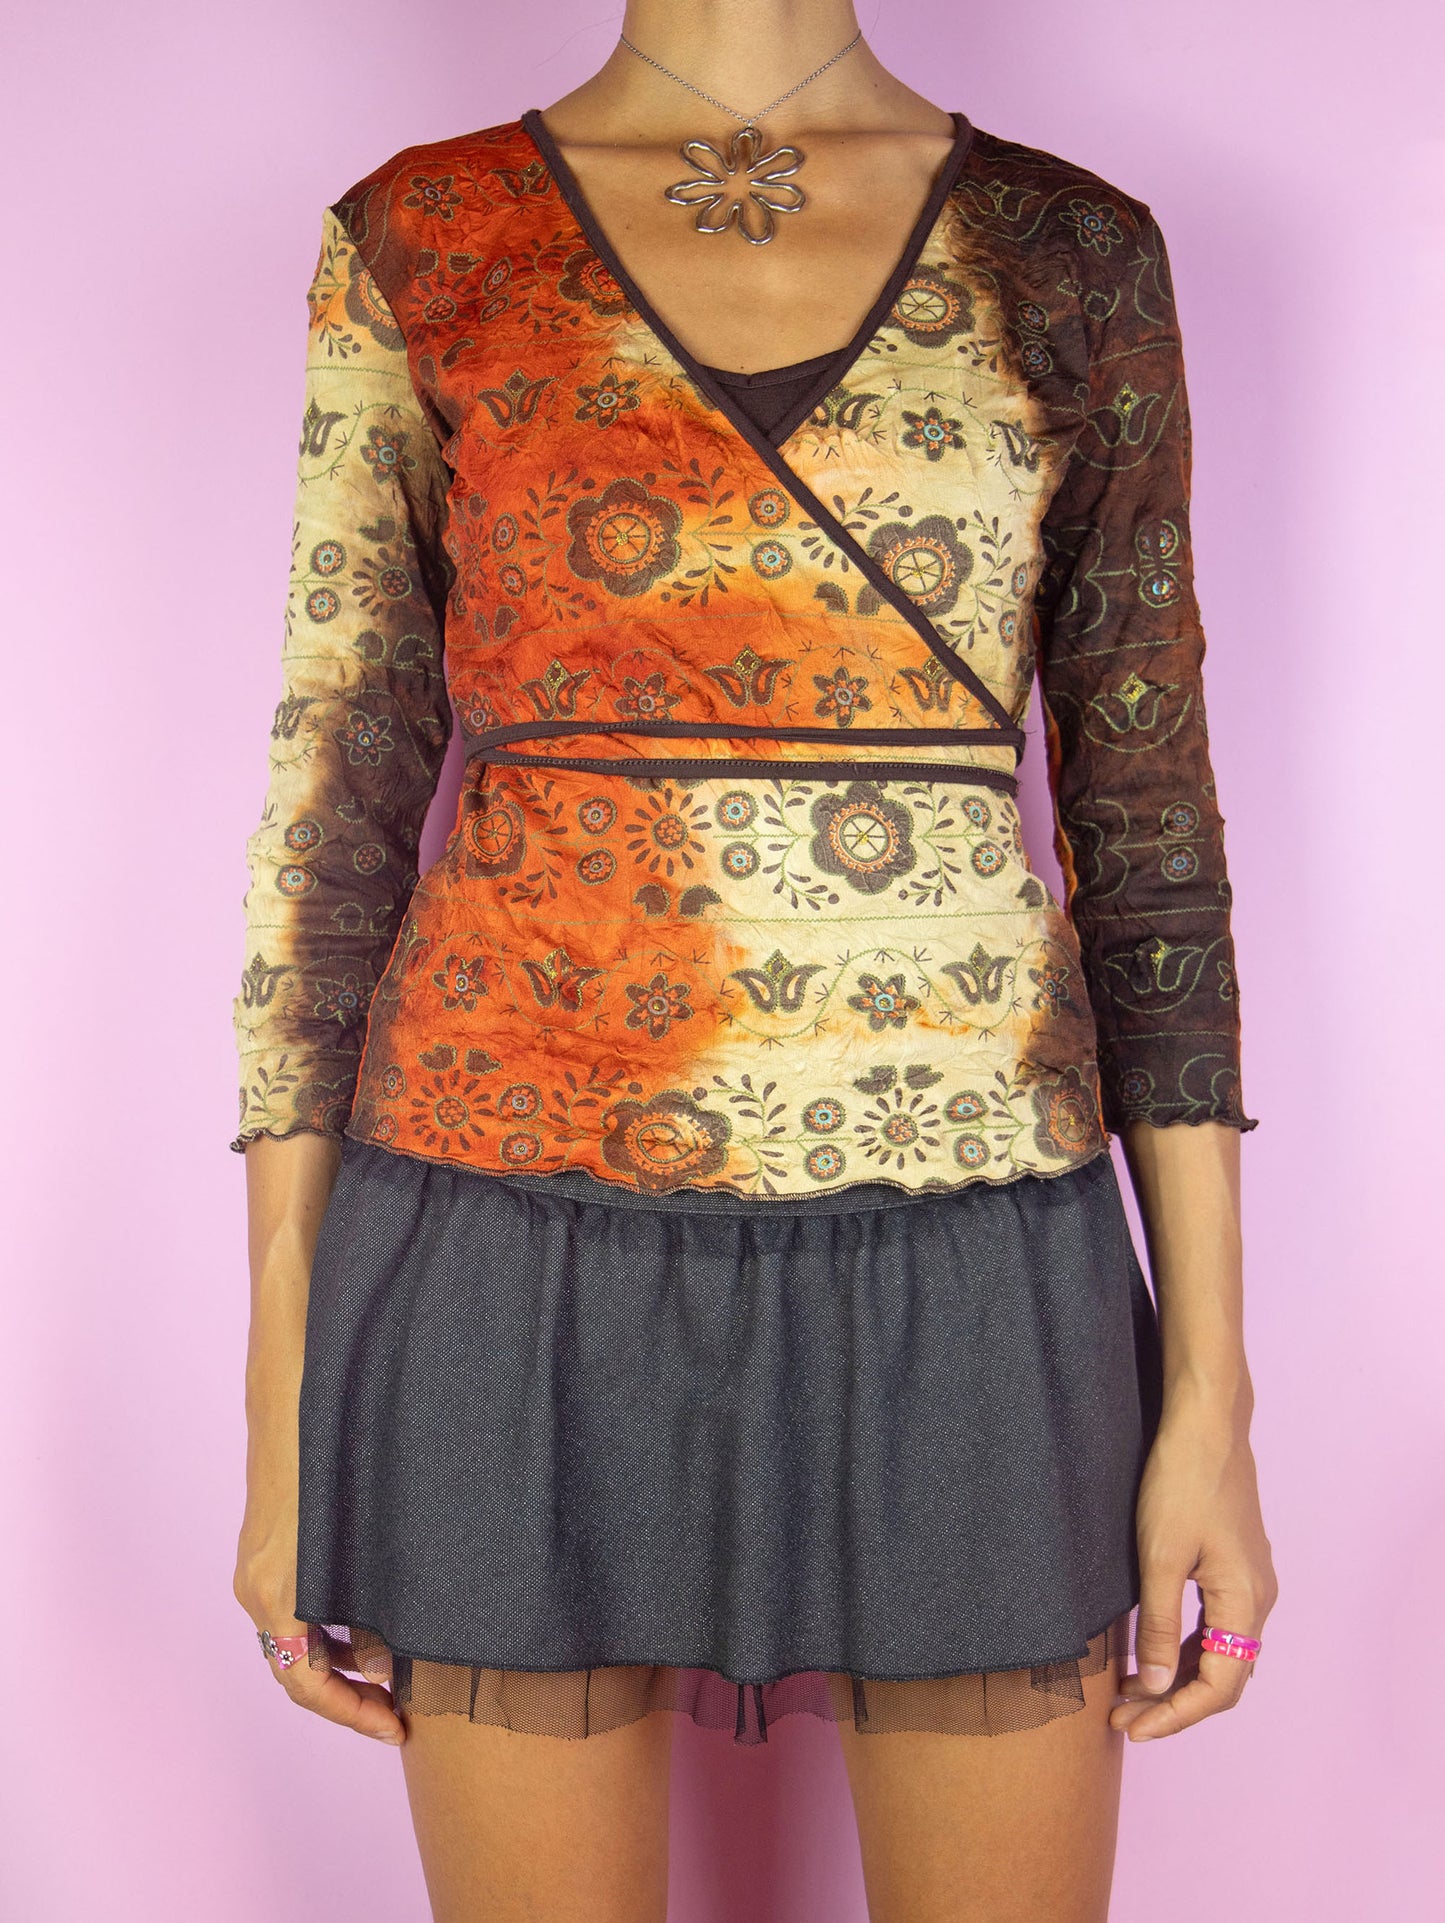 The Y2K Fairy Grunge Wrap Top is a vintage brown, orange and beige tie-dye wrap shirt with abstract floral print and three-quarter sleeves. Cyber boho 2000s side tie top.